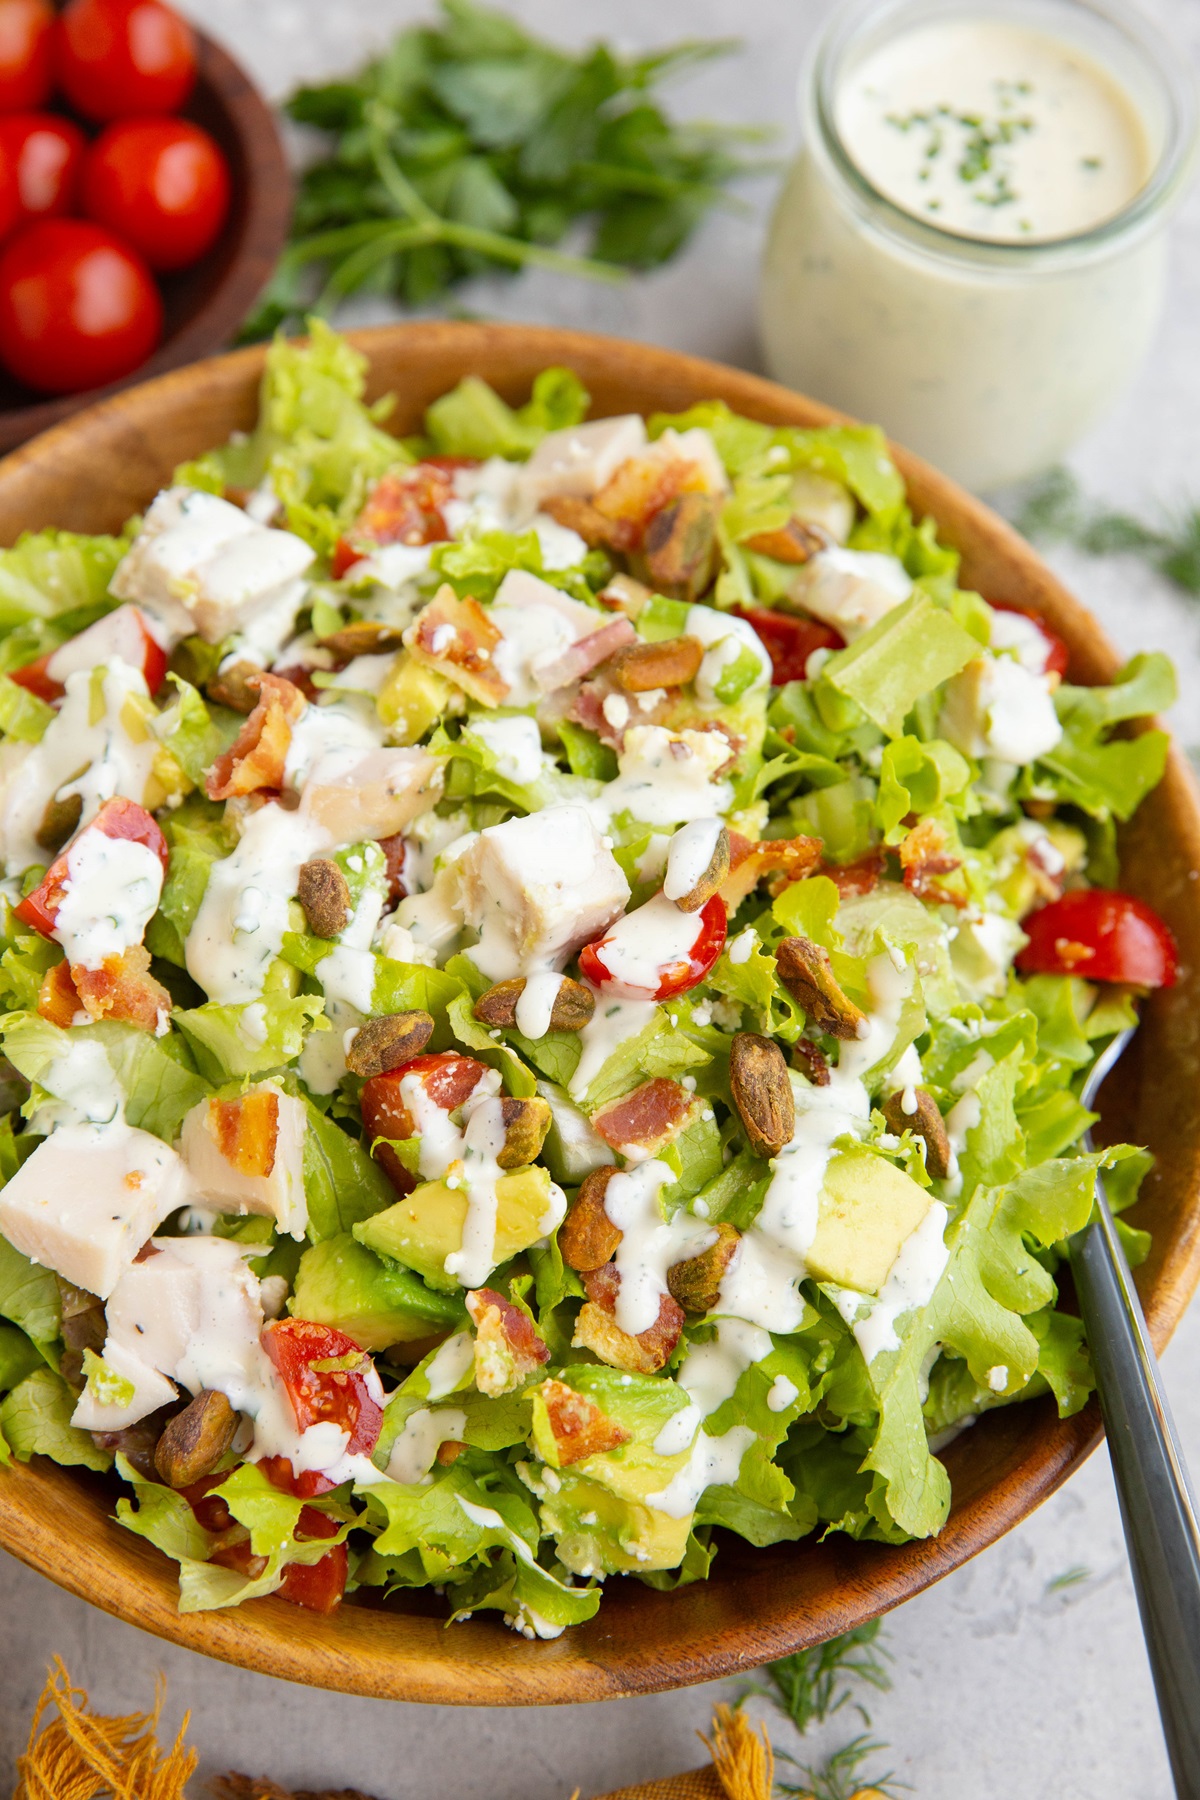 Big wooden bowl of salad drizzled with creamy homemade ranch dressing.